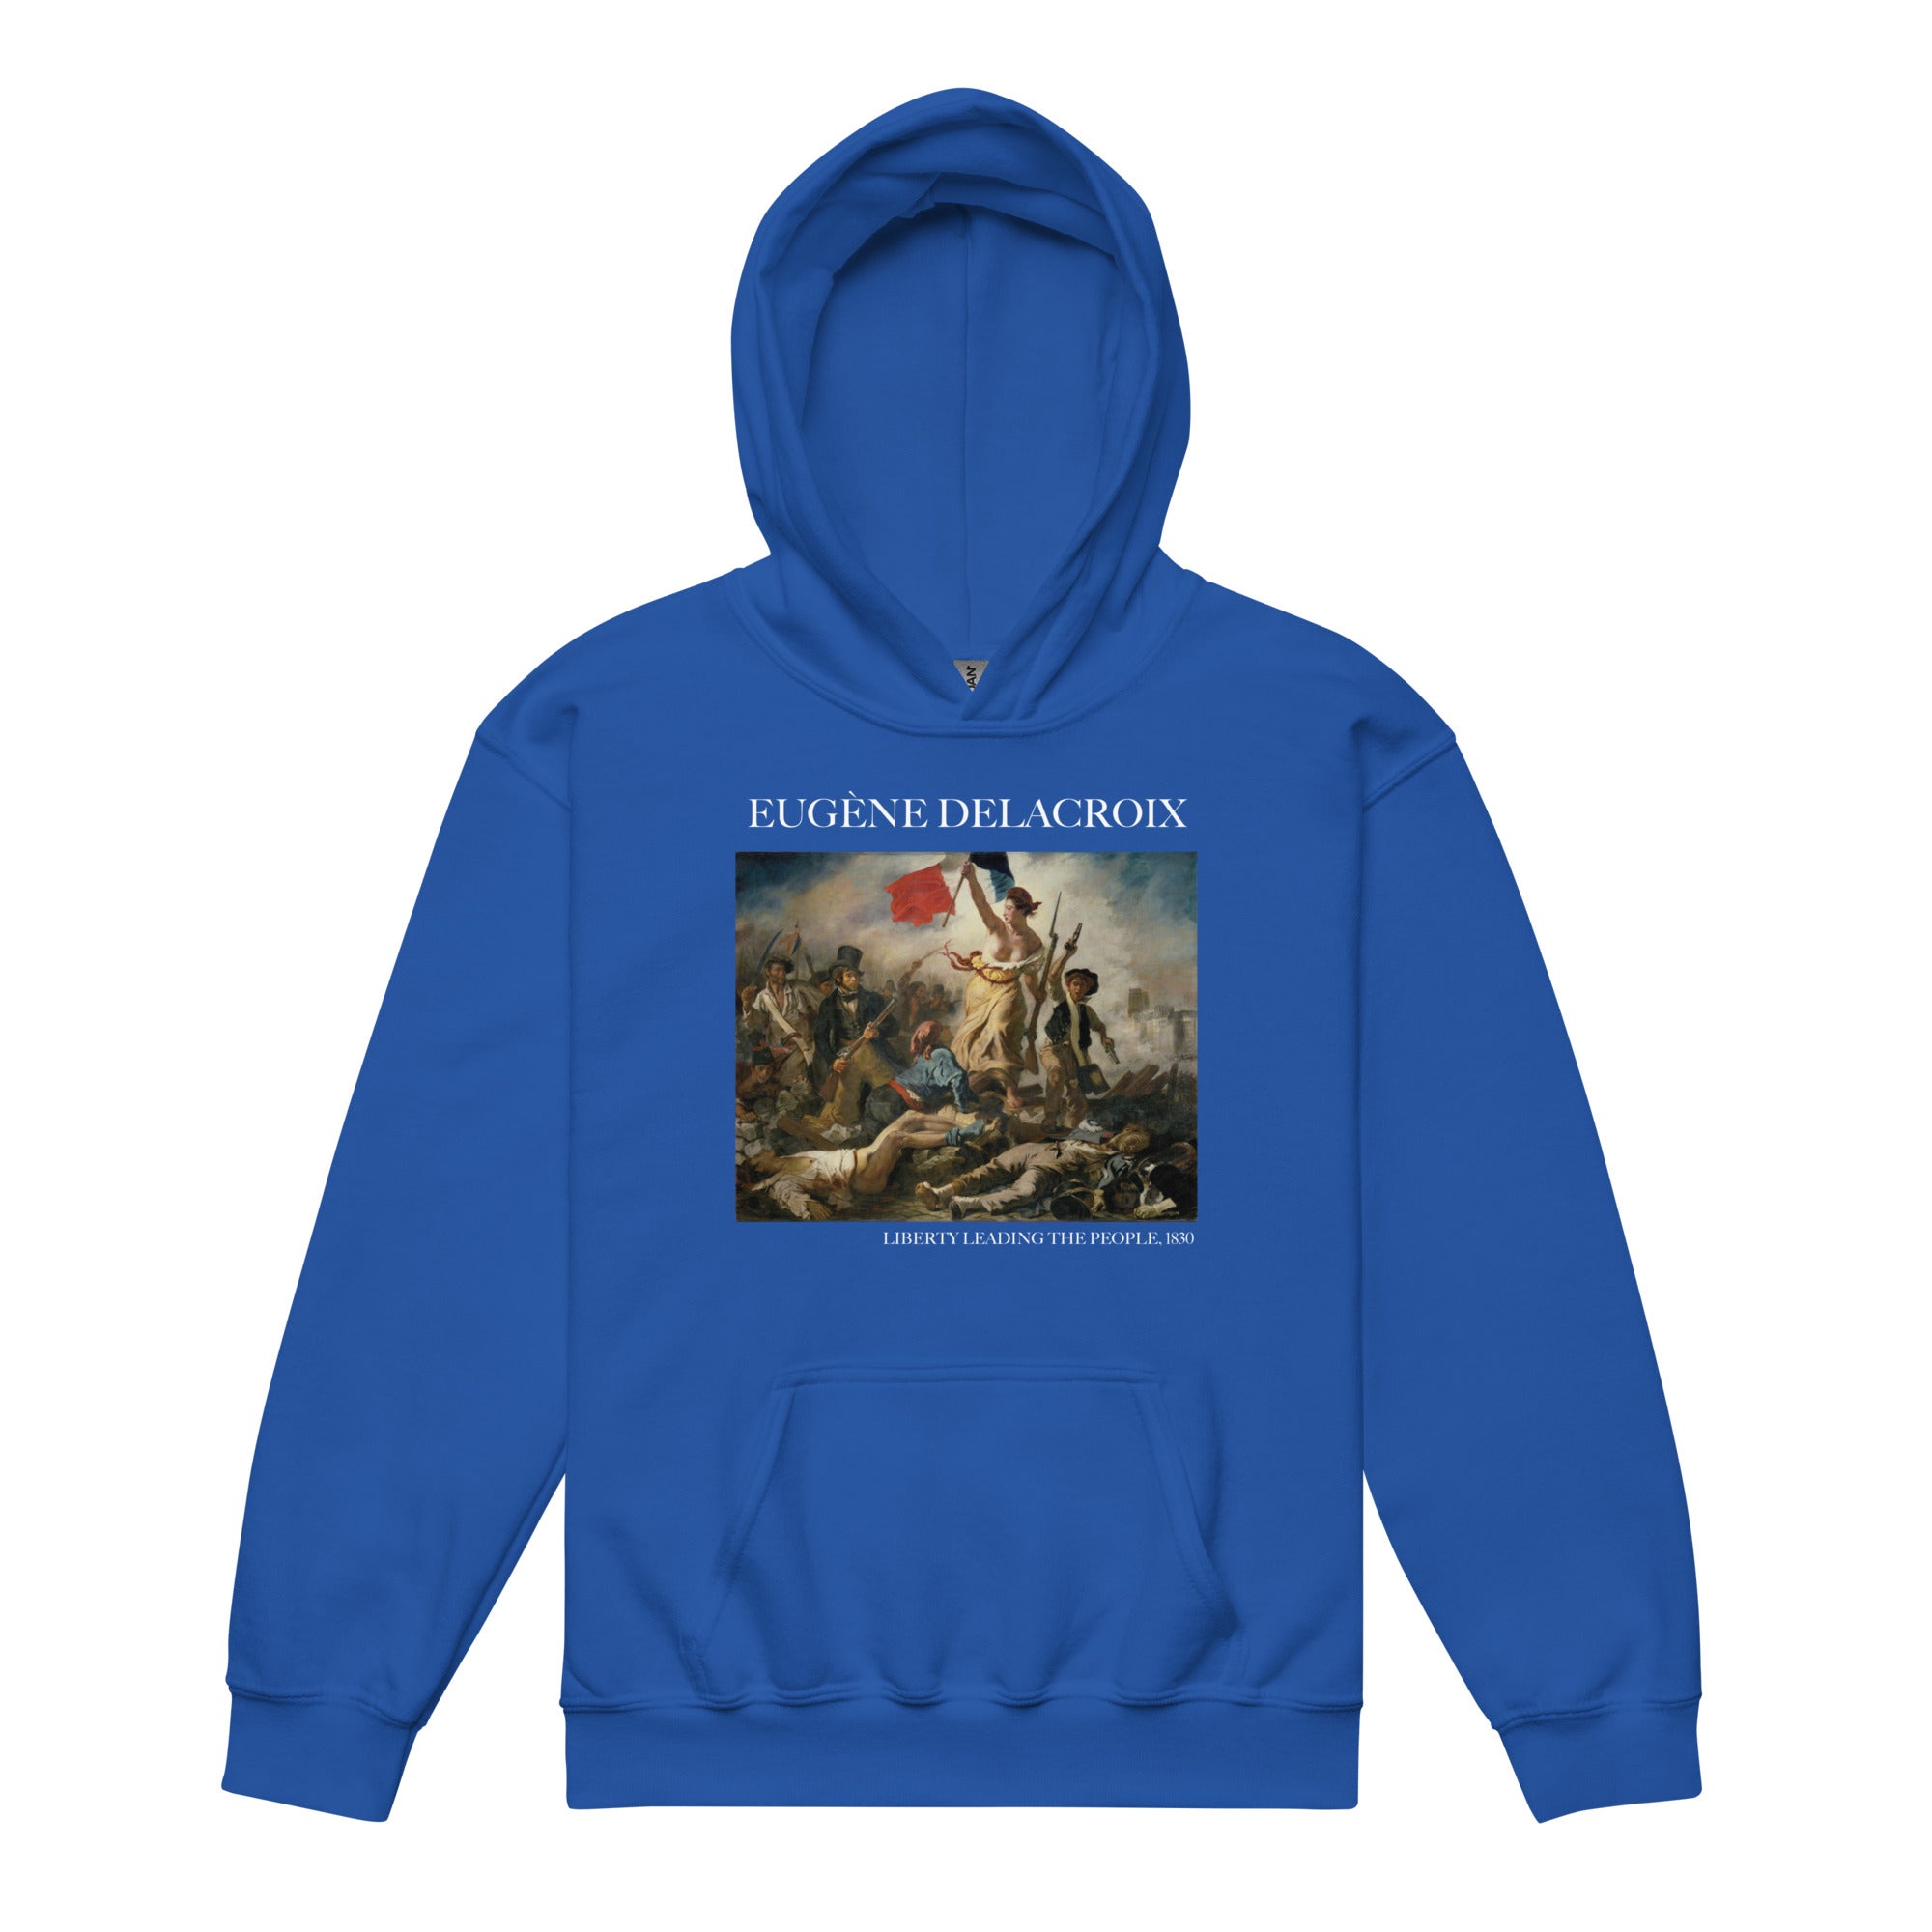 Eugène Delacroix 'Liberty Leading the People' Famous Painting Hoodie | Premium Youth Art Hoodie